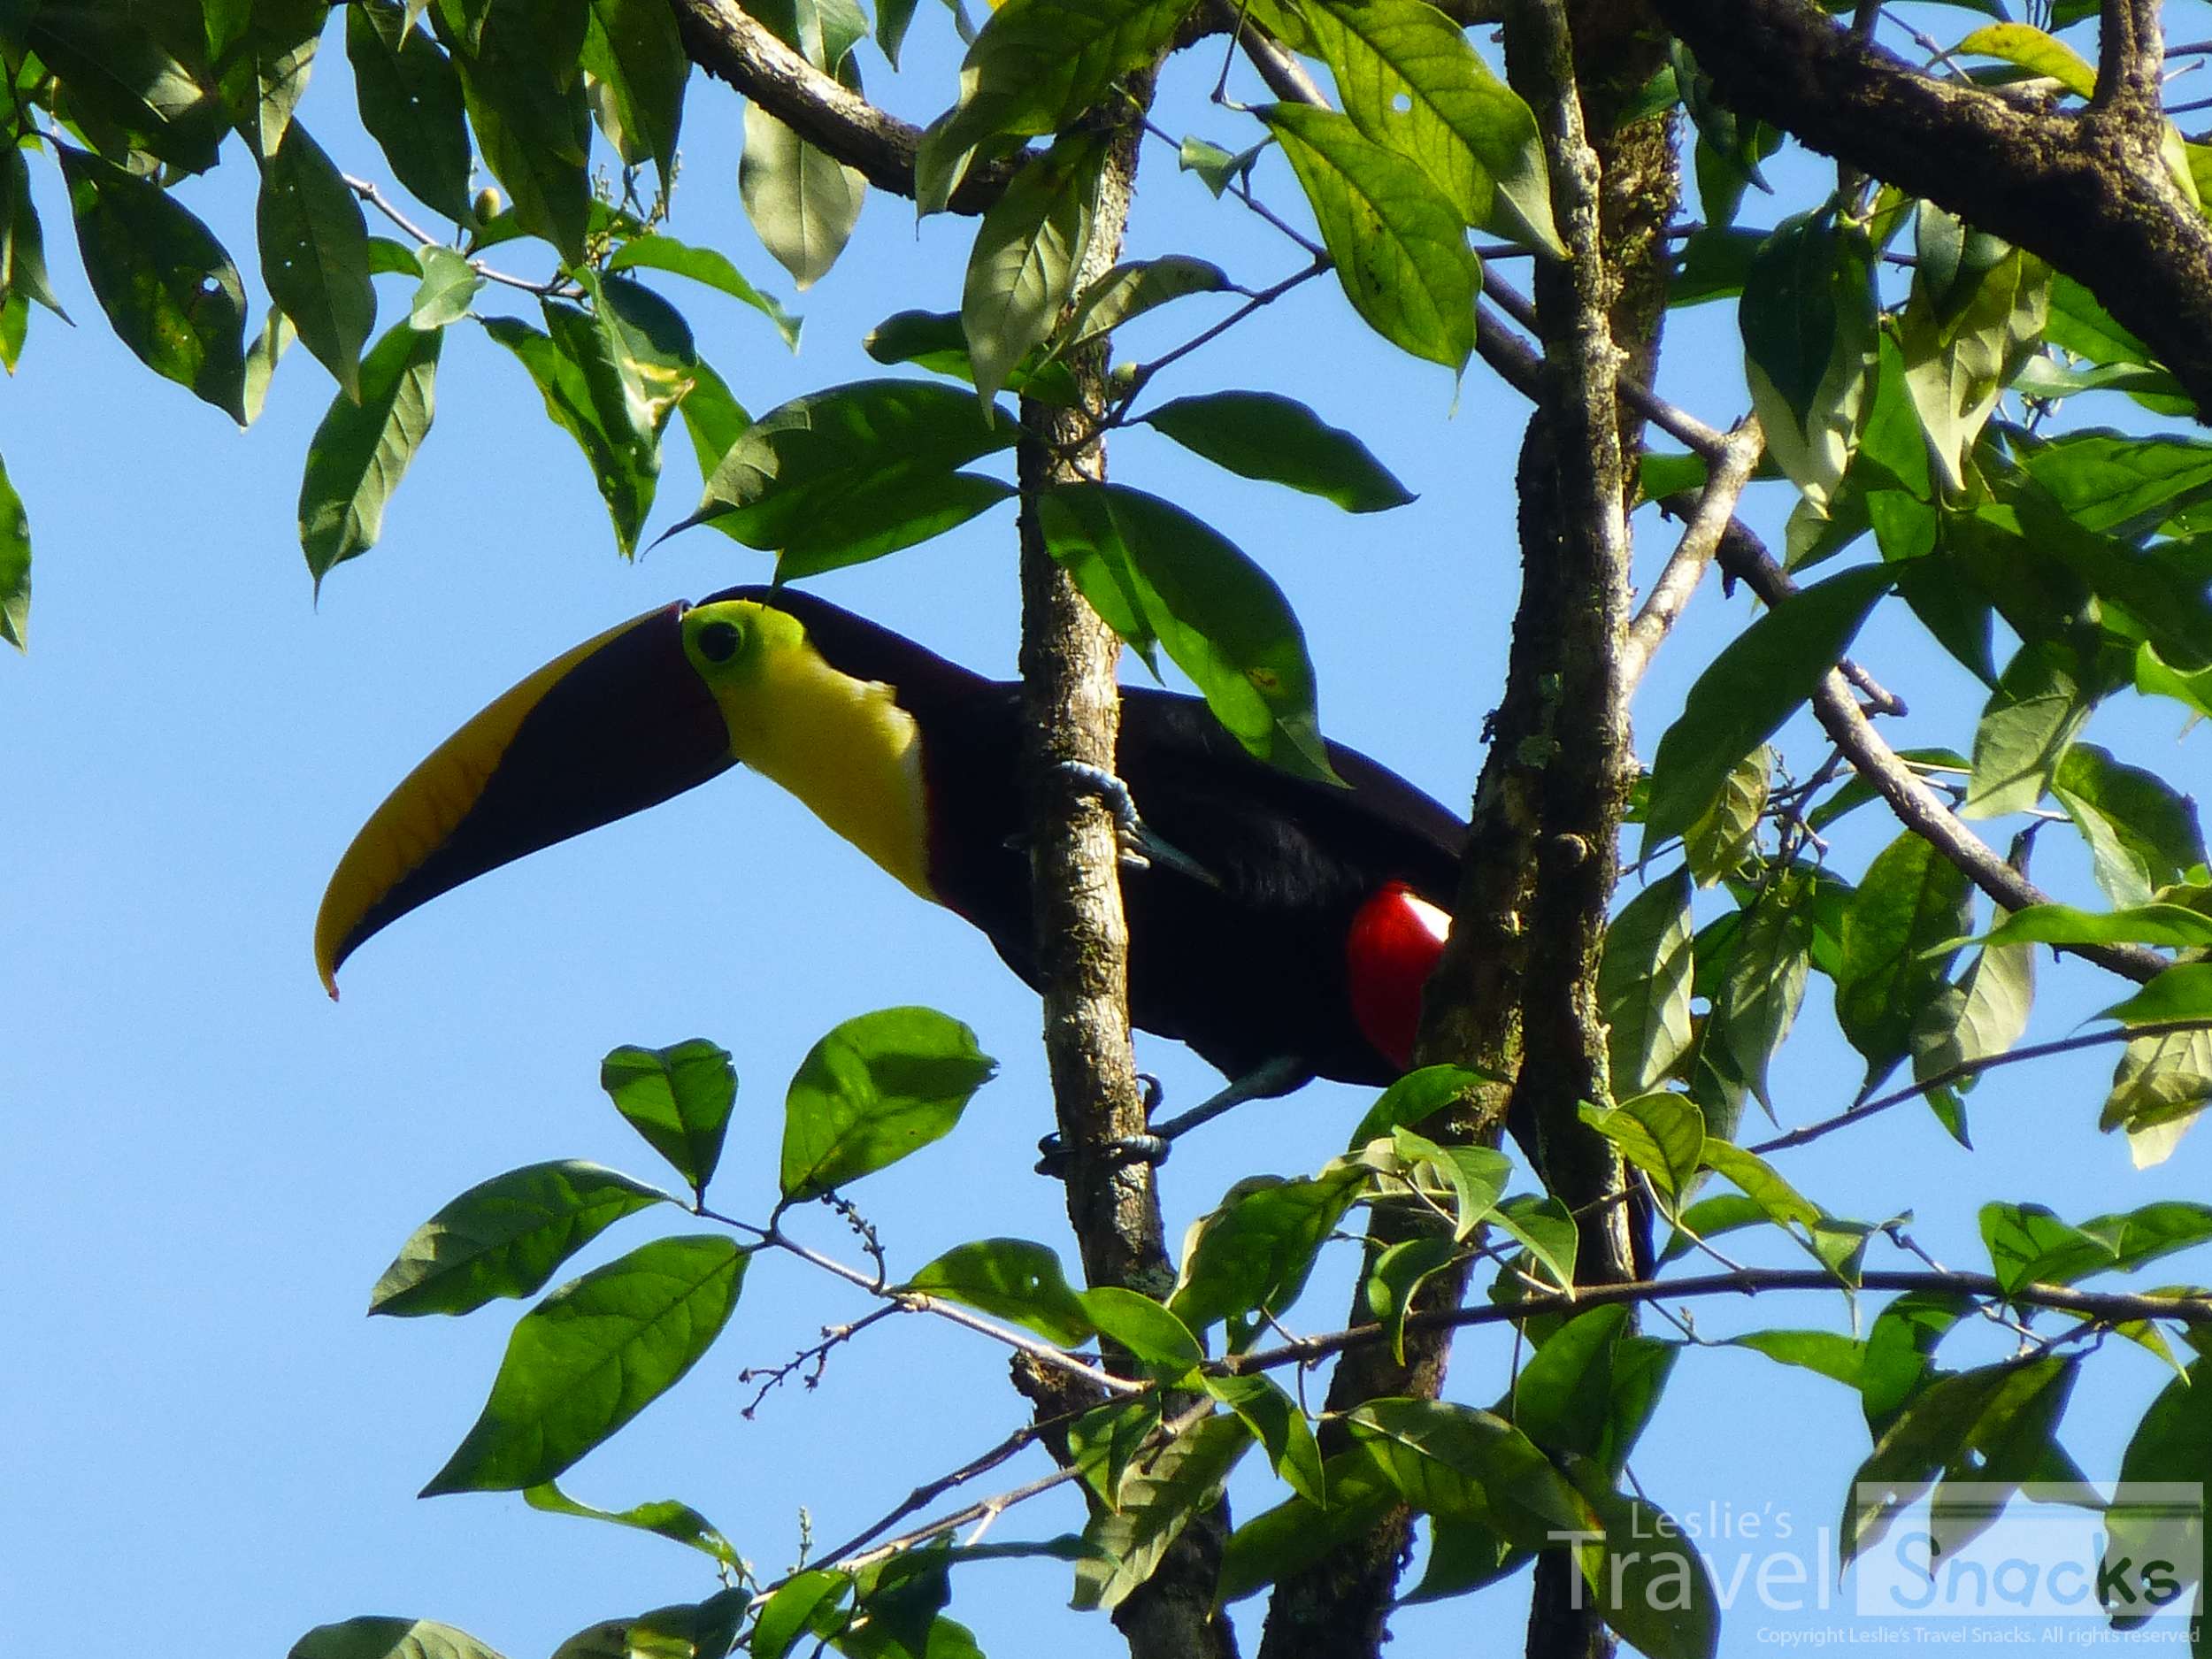 This Toucan was hanging out in Arena Alta in Zancudo.